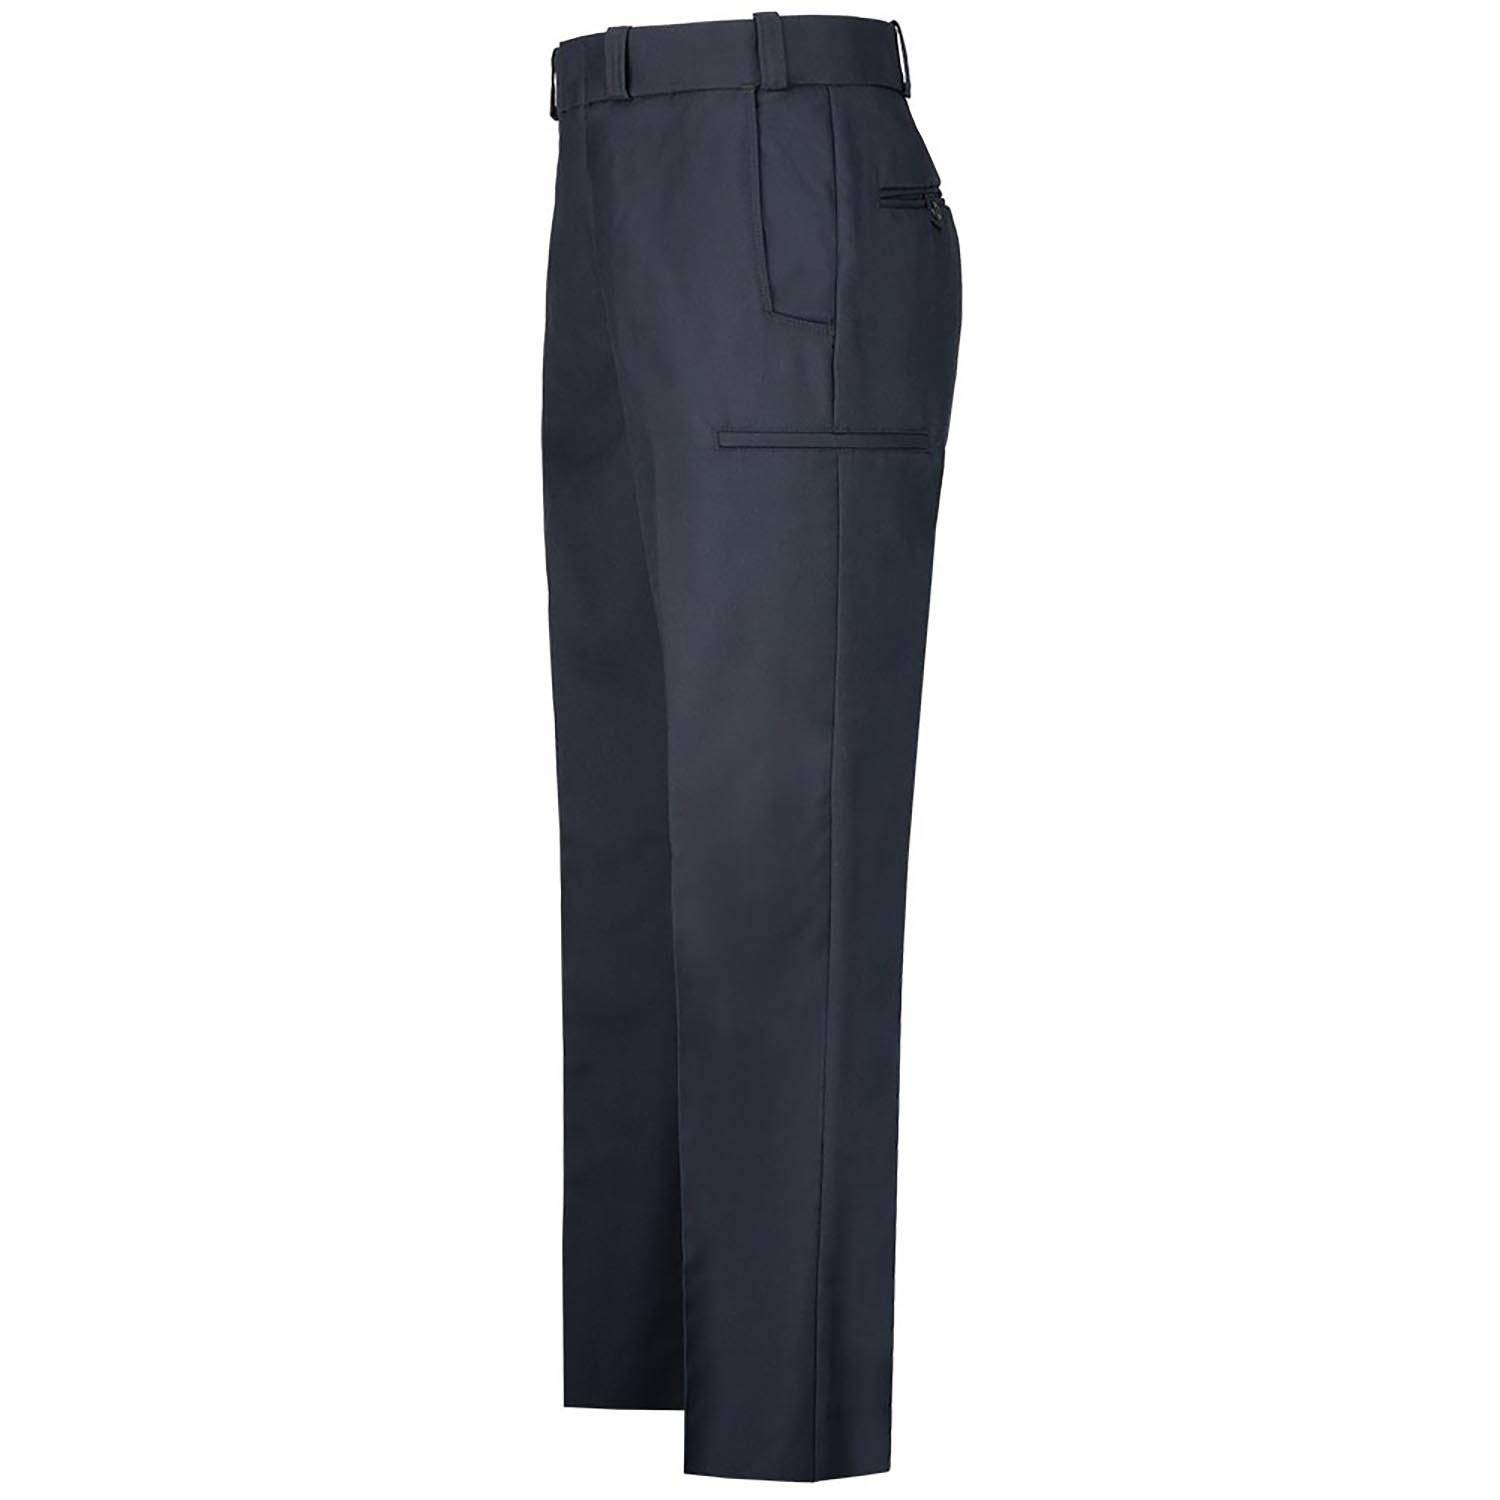 Flying Cross 2.0 Justice Polyester/ Wool Men's Pants